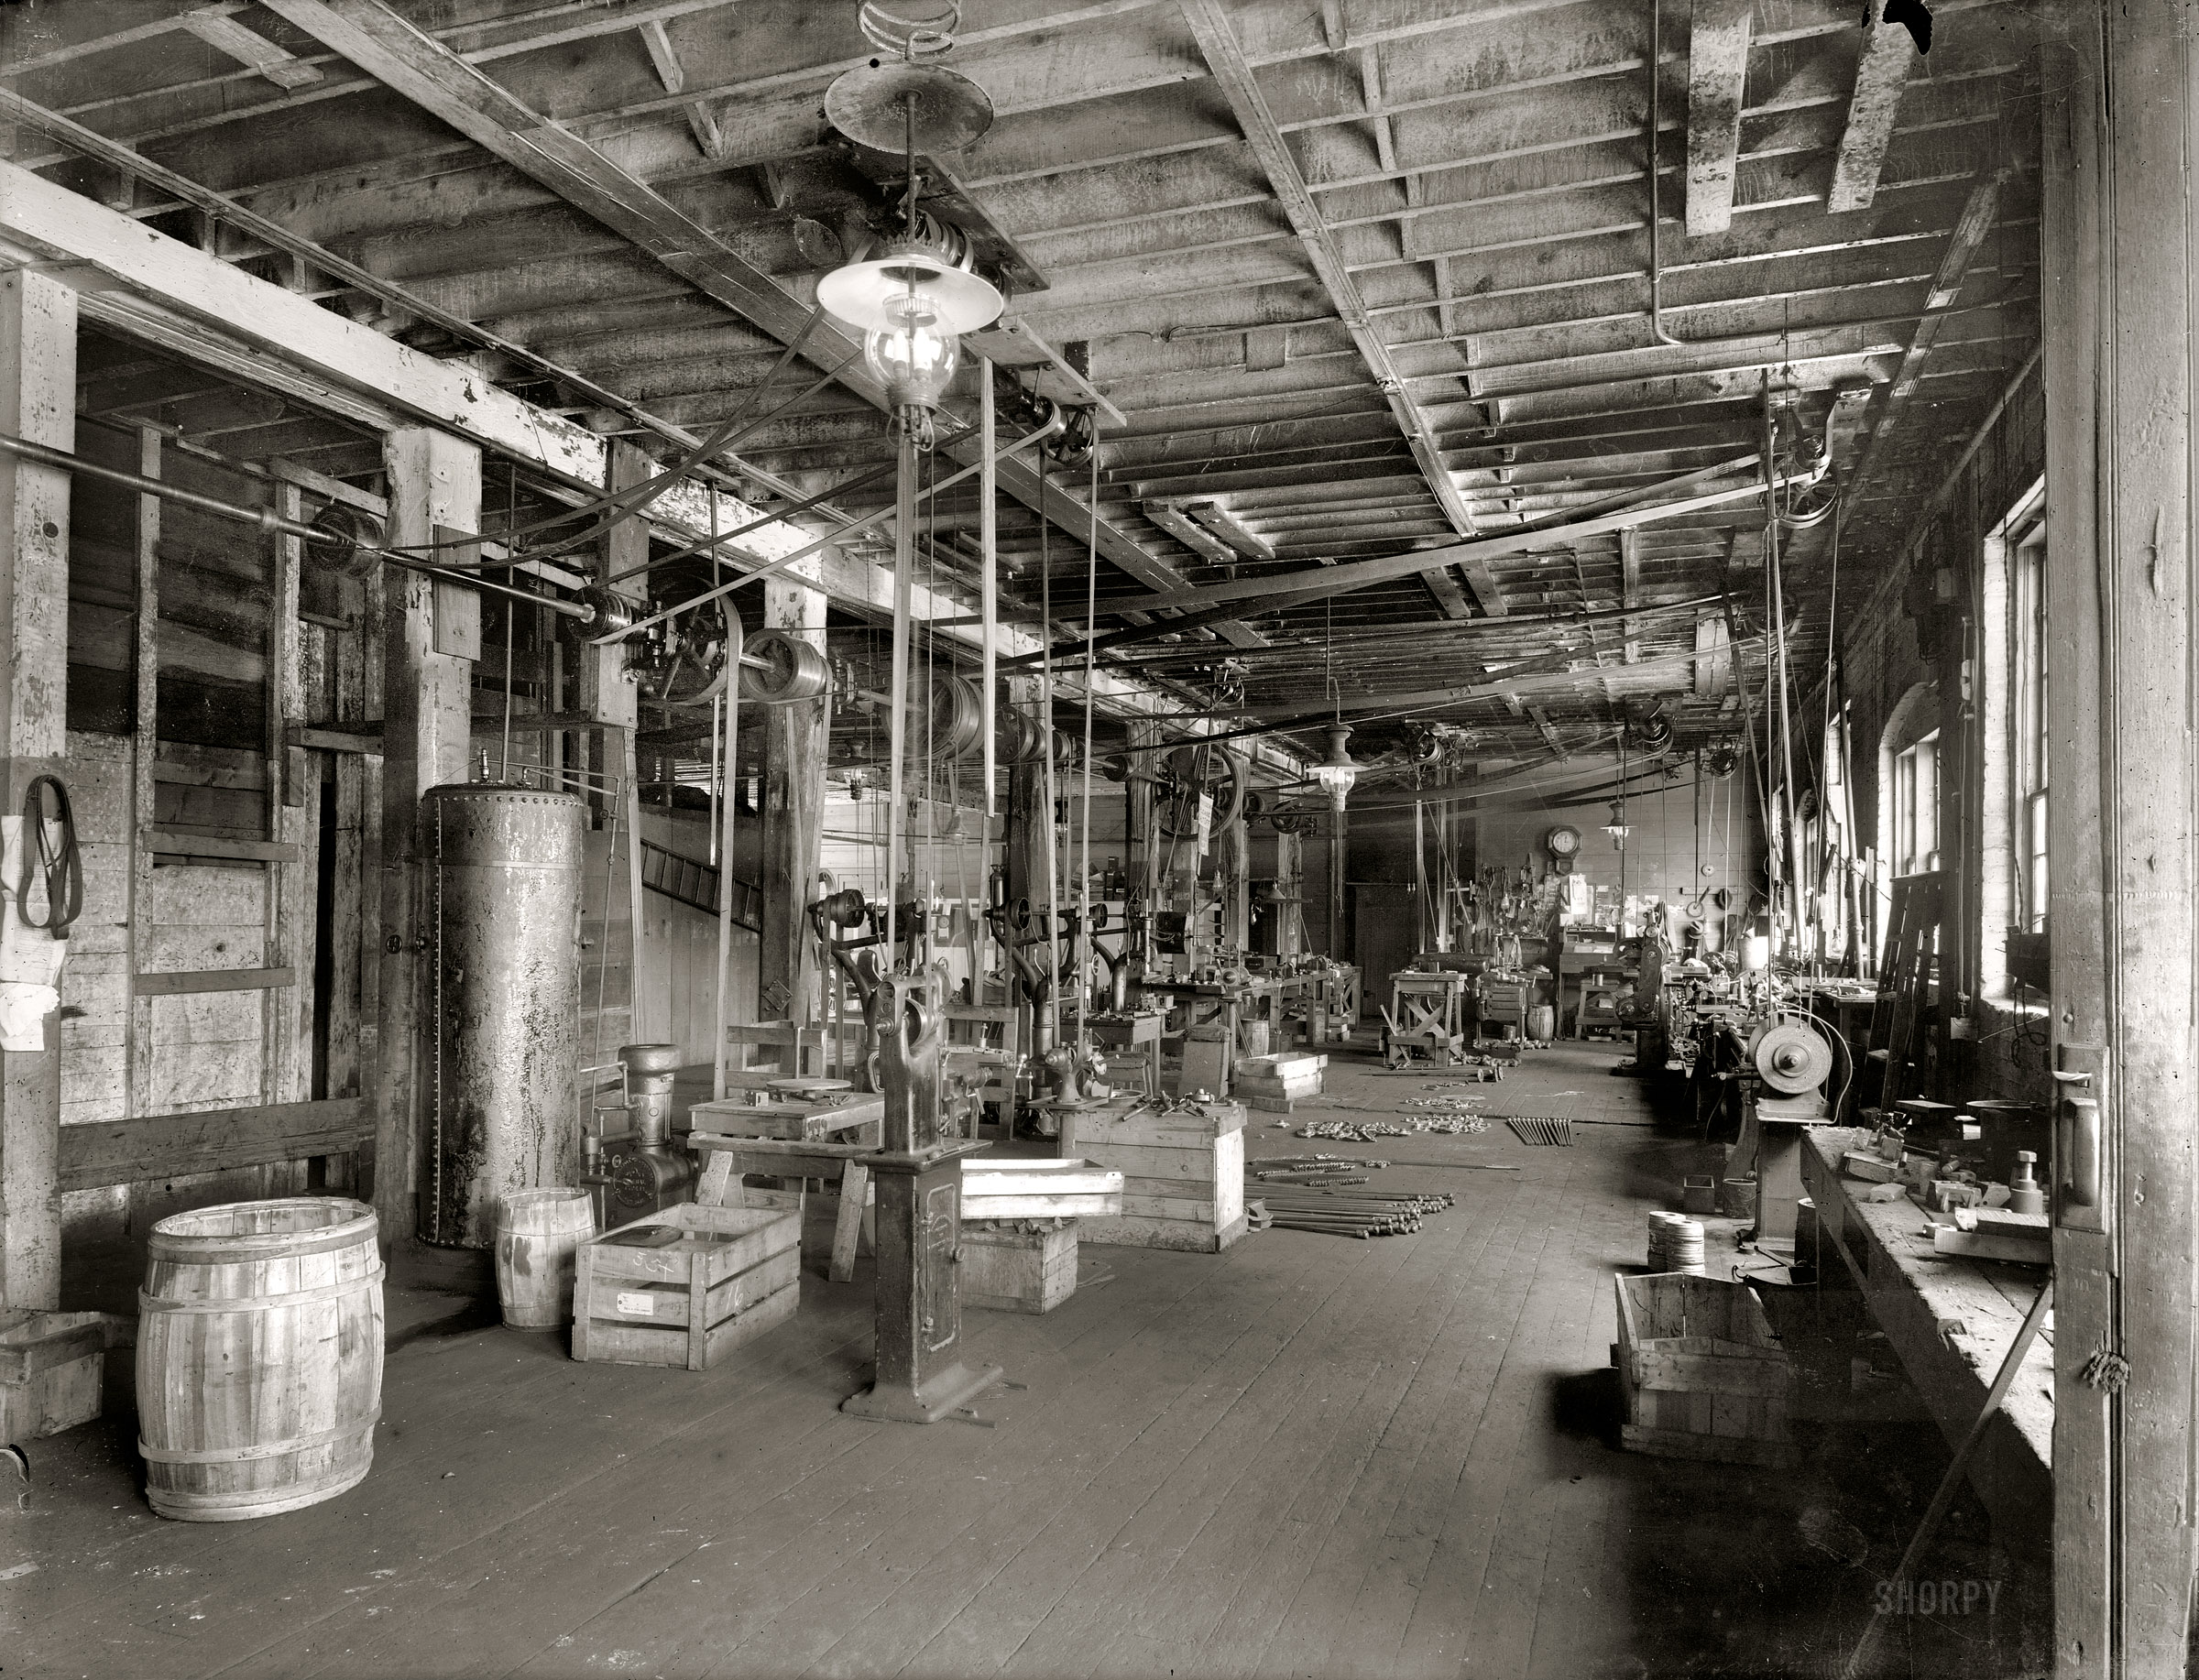 Circa 1916. "Hackett Motor Car Co., Jackson, Michigan." National Photo Company Collection glass negative. View full size. Another view here.